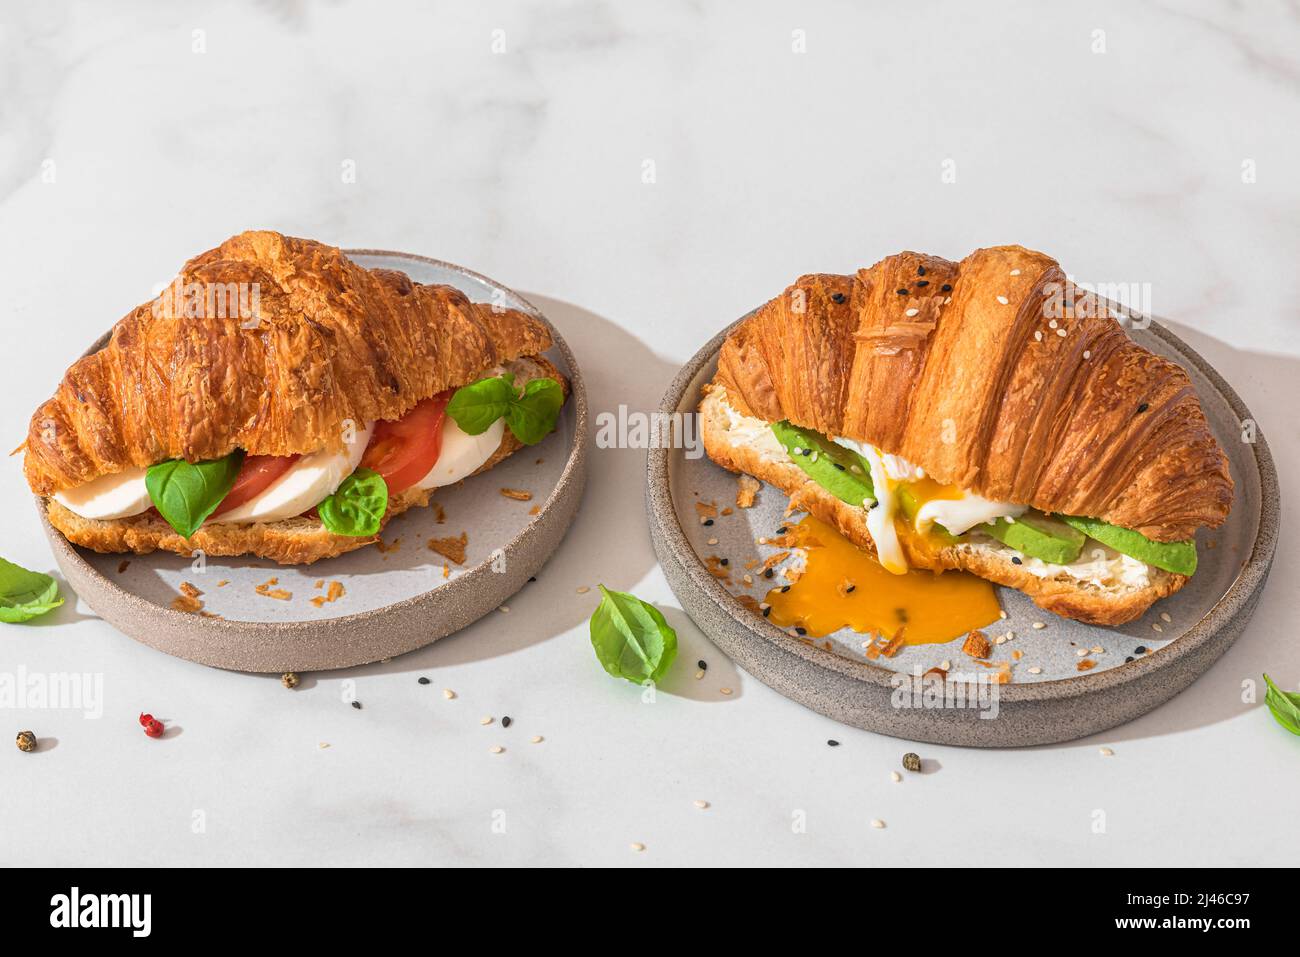 Croissant sandwiches with poached egg, avocado, soft cheese, mozzarella and tomato in a plate on white background. French breakfast. Tasty food Stock Photo